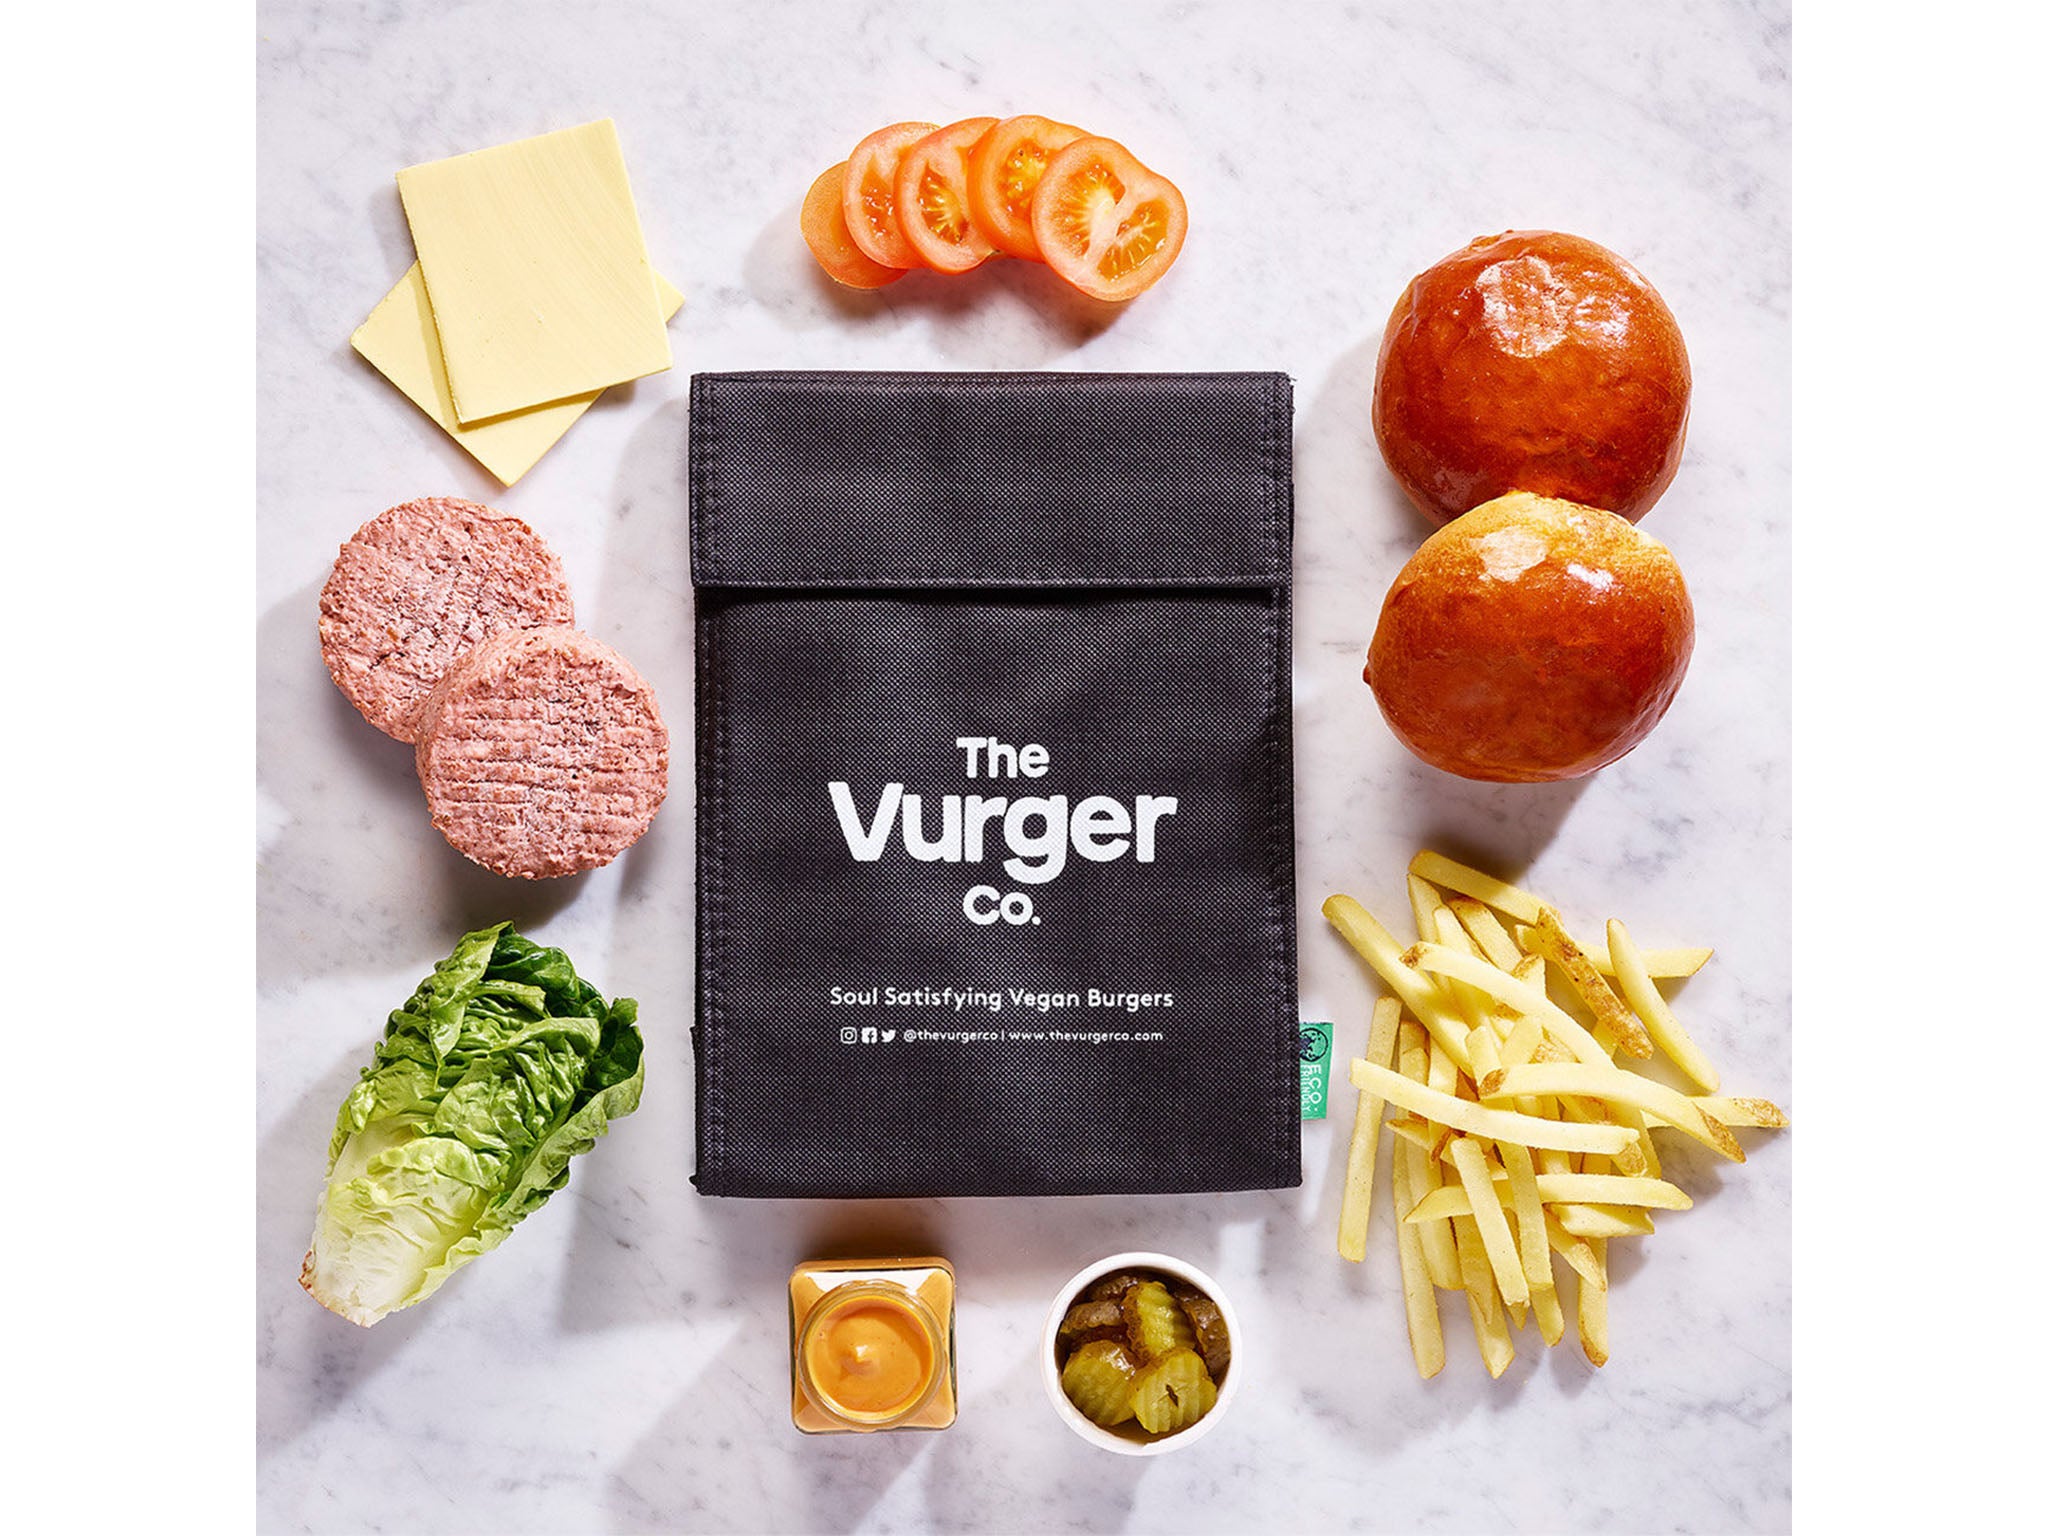 Ditch your usual takeaway for this delicious burger kit